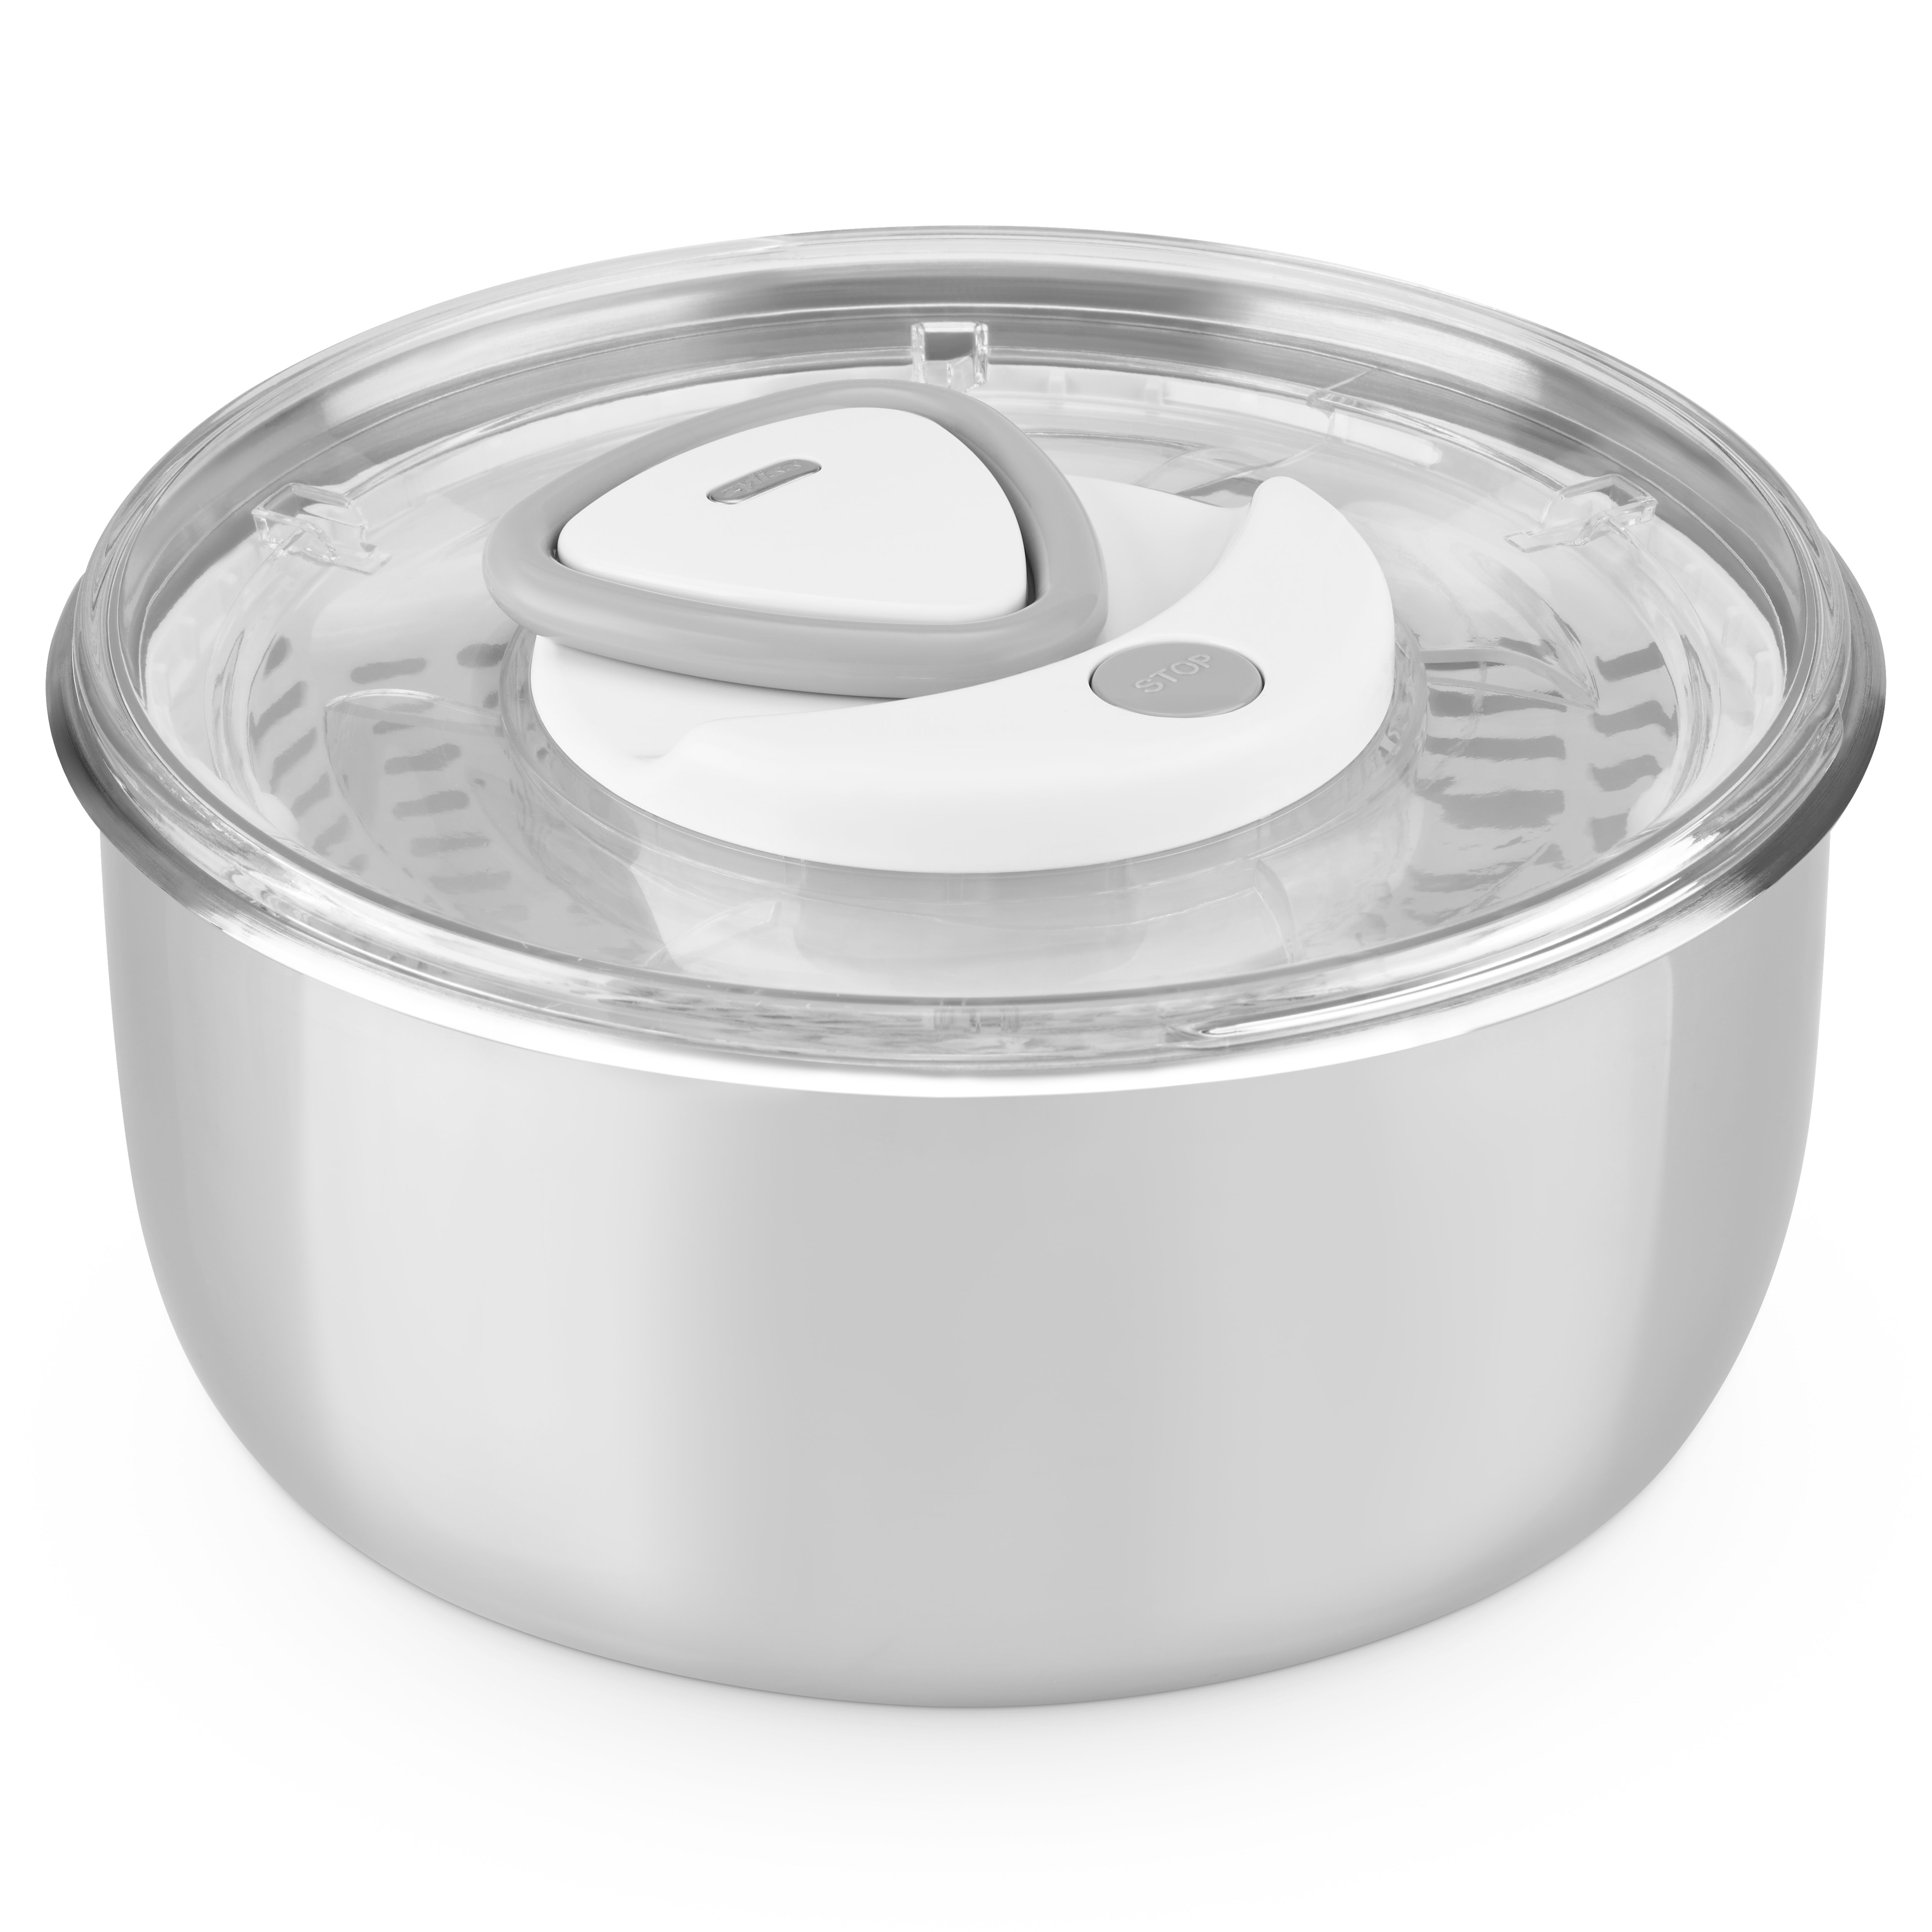 Zyliss Stainless Steel Salad Spinner & Reviews